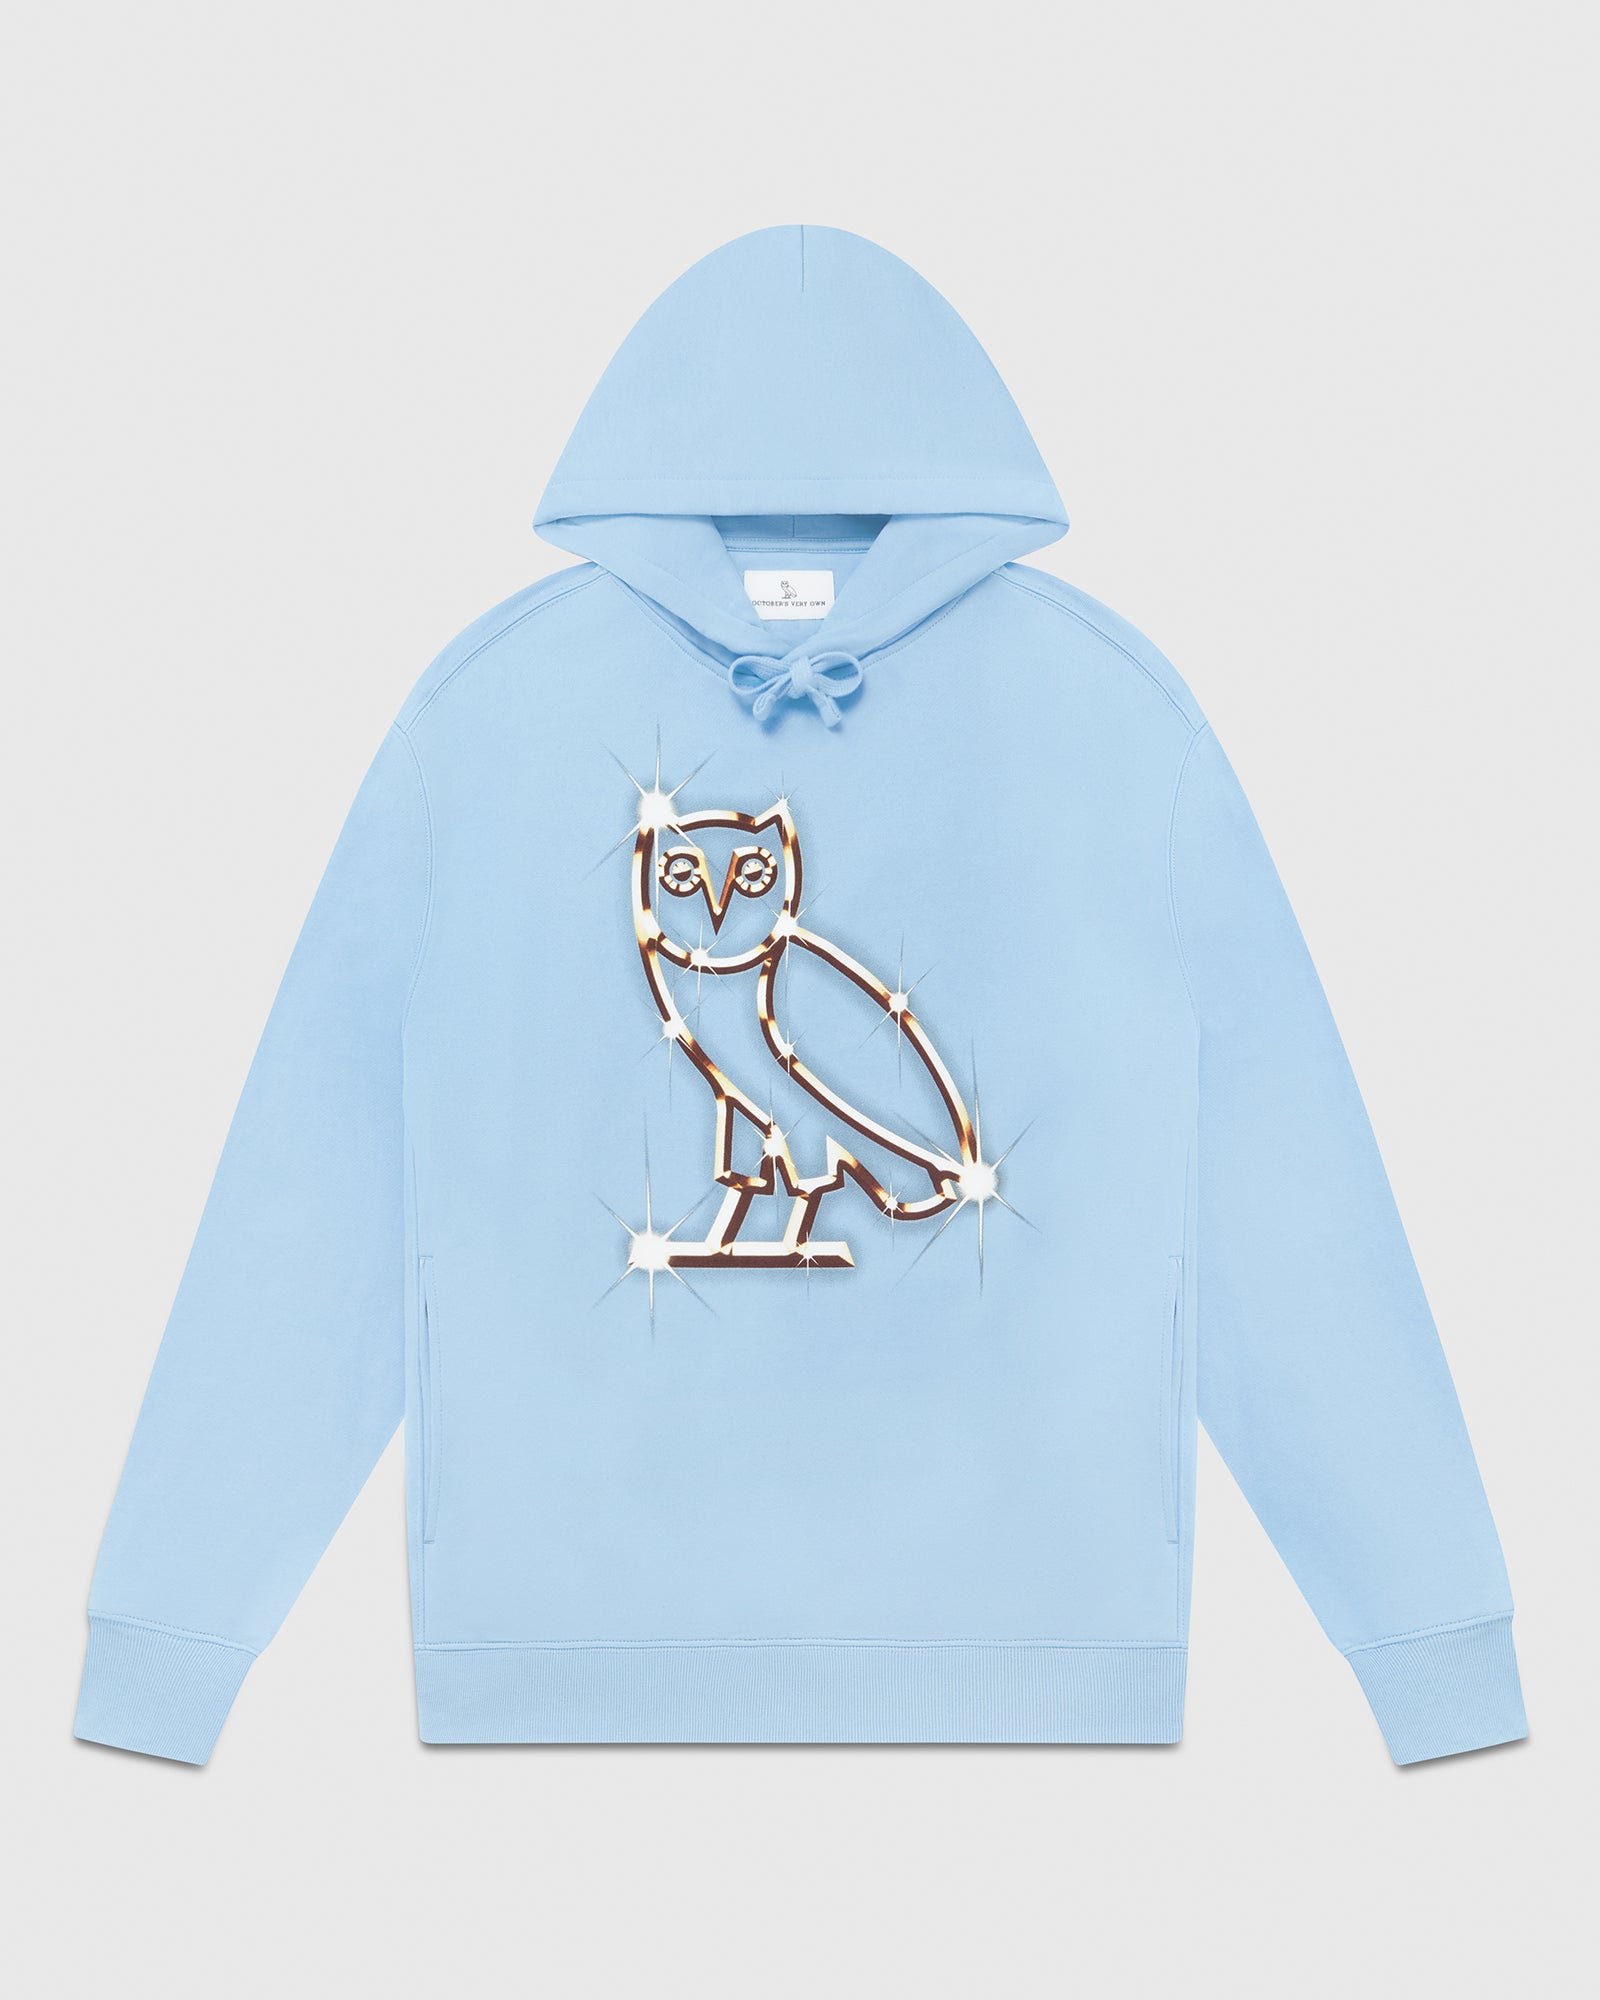 Ovo Embroidered Floral Quarter Zip Hoodie Coral – Utopia Shop